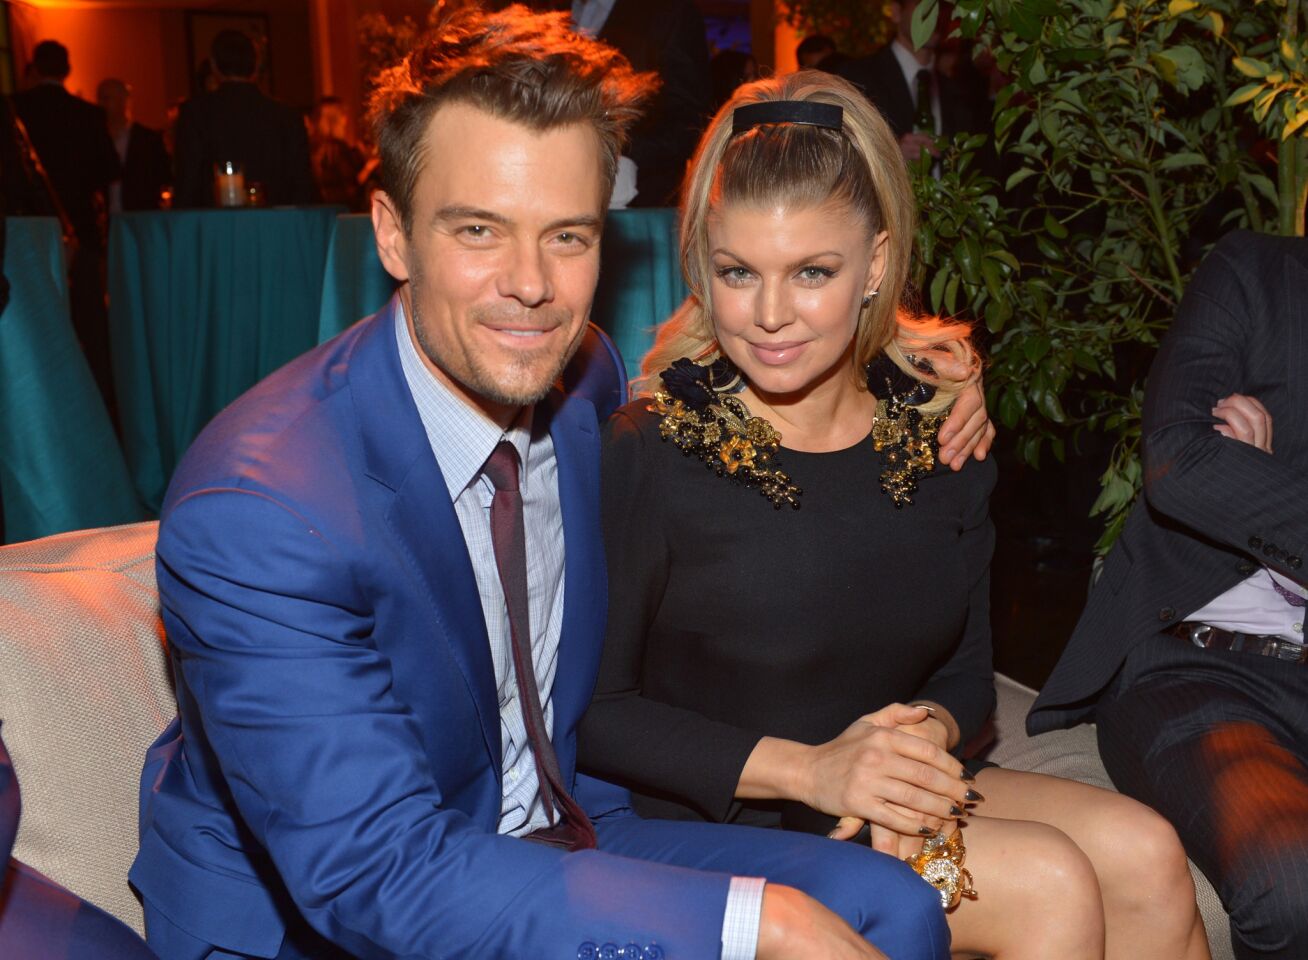 Fergie, the Black Eyed Peas songstress and her actor hubby, Josh Duhamel, announced in February 2013 that they were expecting a baby boy. She confirmed her new lovely lady lump via Instagram. "Josh & Me & BABY makes three!!! #mylovelybabybump," she wrote. On Aug. 29, 2013, the couple, who married in 2009, welcomed their baby boy Axl Jack Duhamel. The lovely little lump weighed in at 7 pounds, 10 ounces. MORE: Fergie, Josh Duhamel welcome baby boy